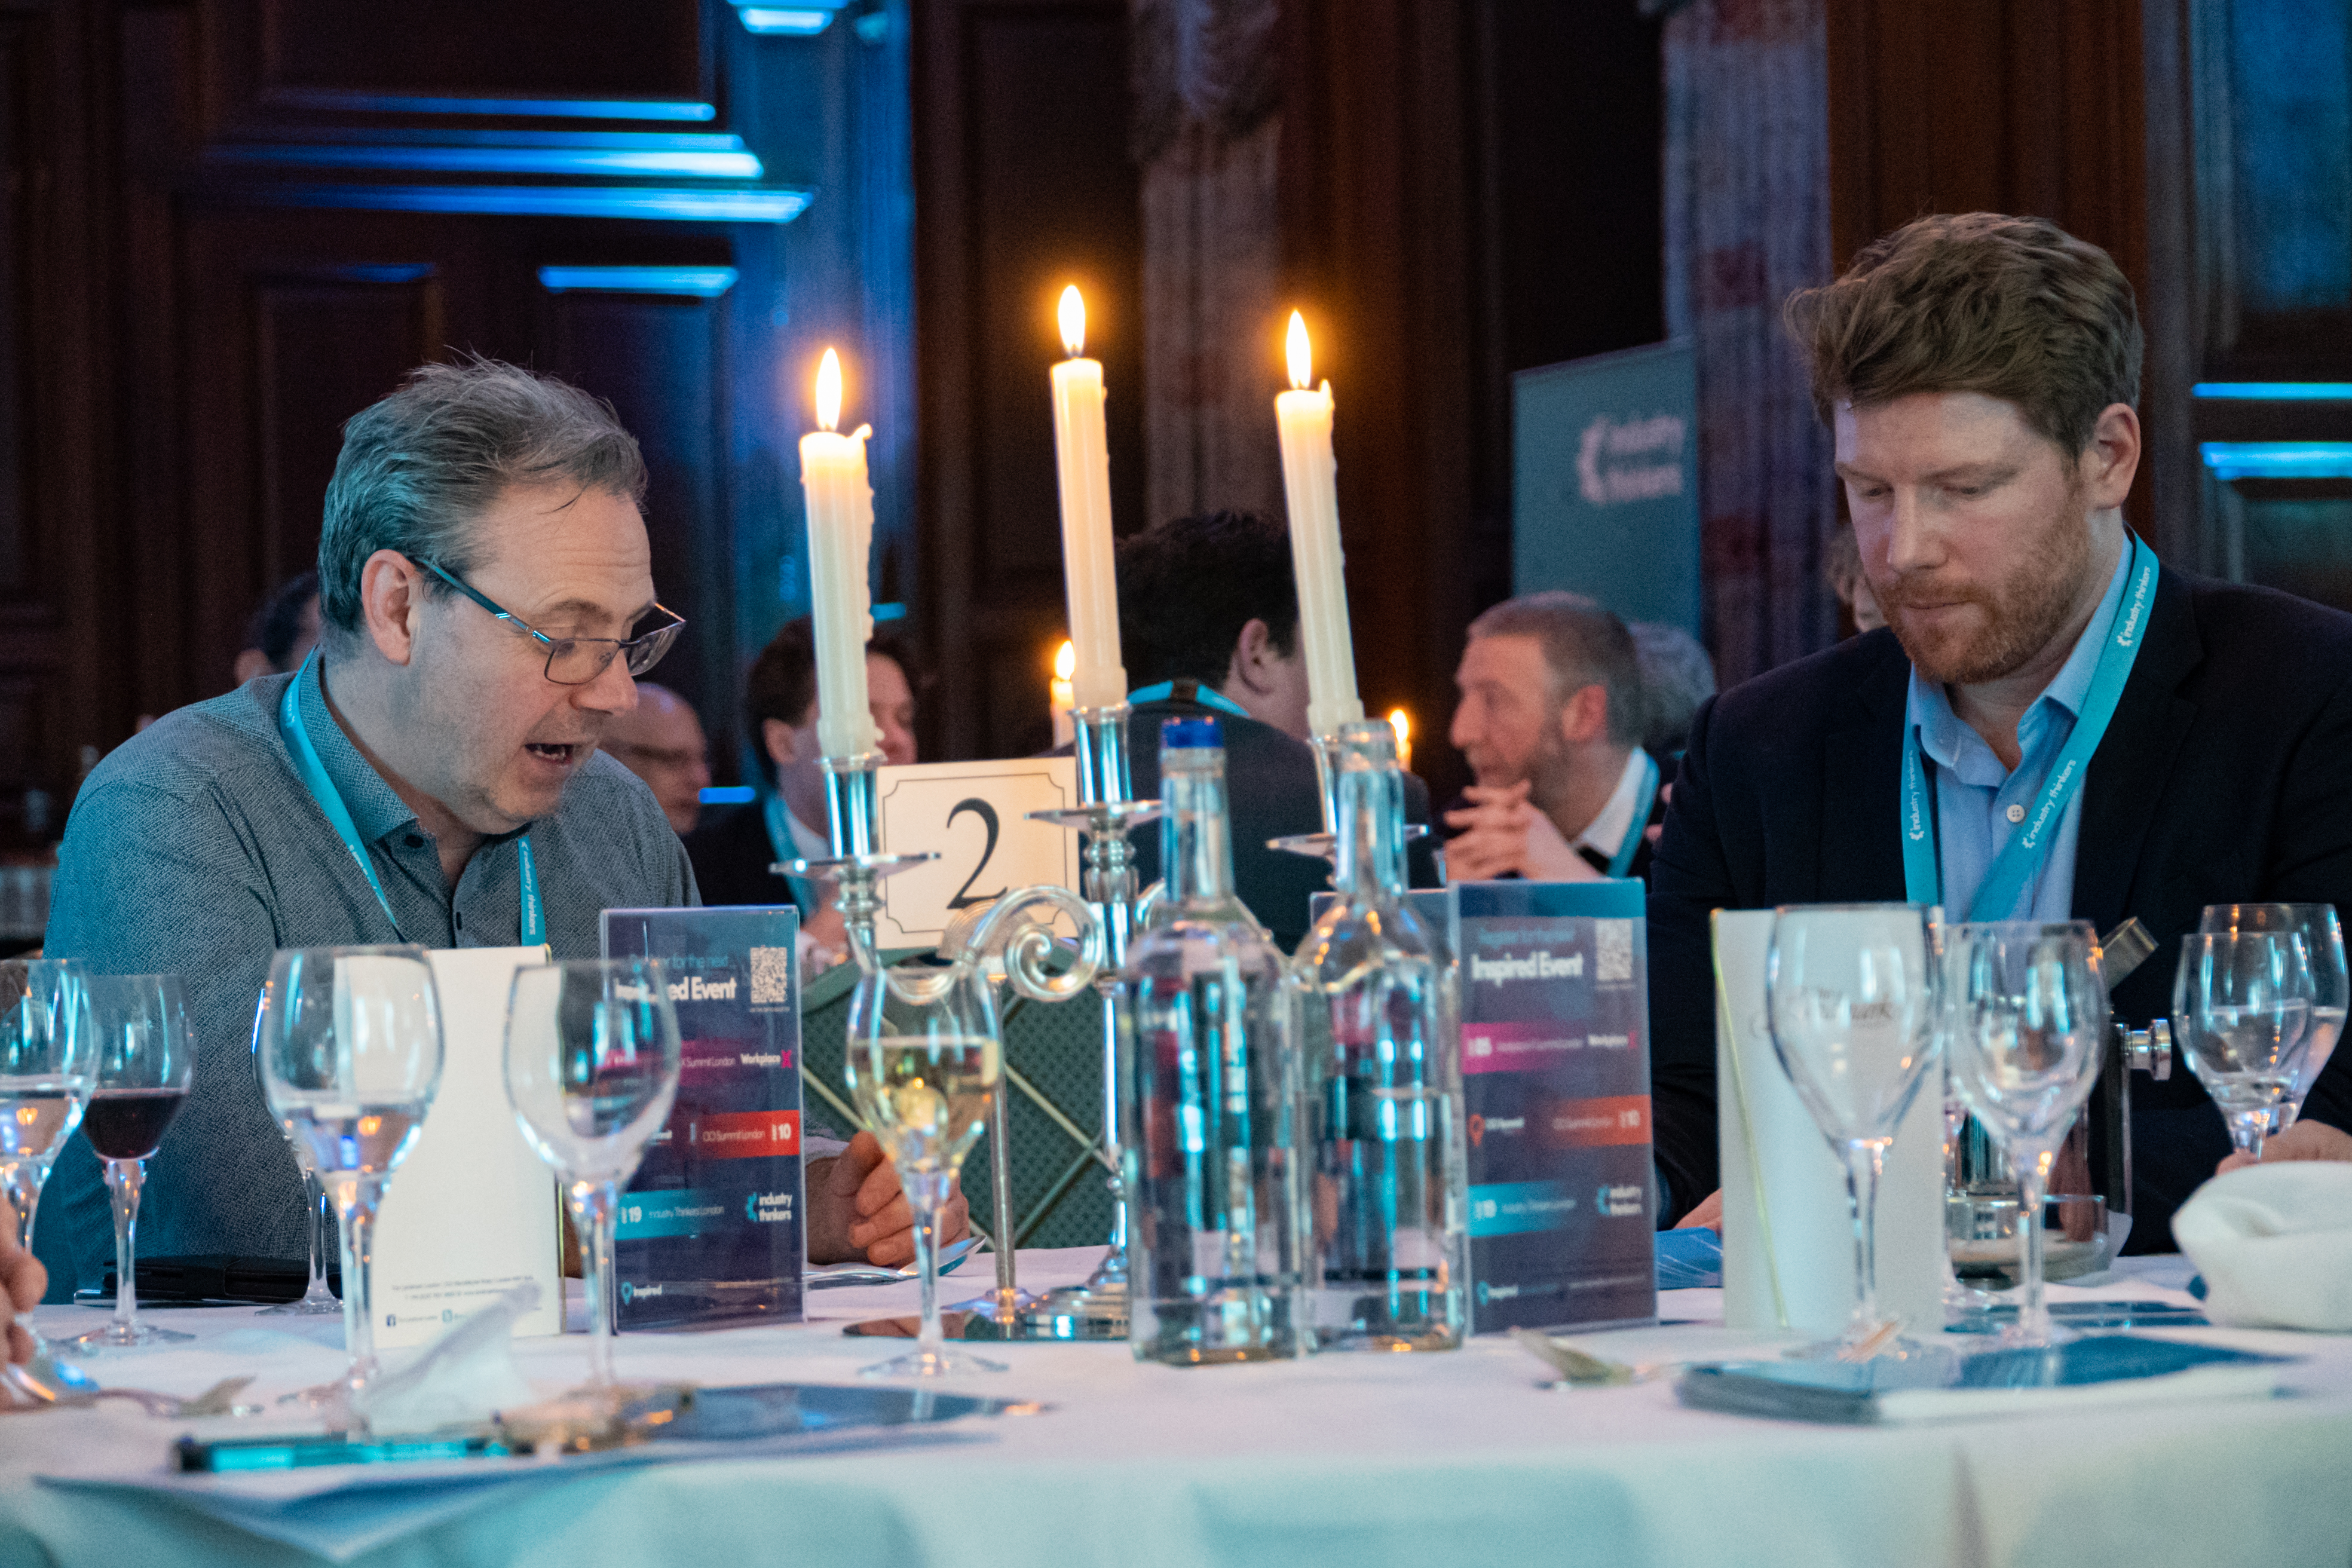 Industry Thinkers Dinner - Topical Discussion with IT leaders